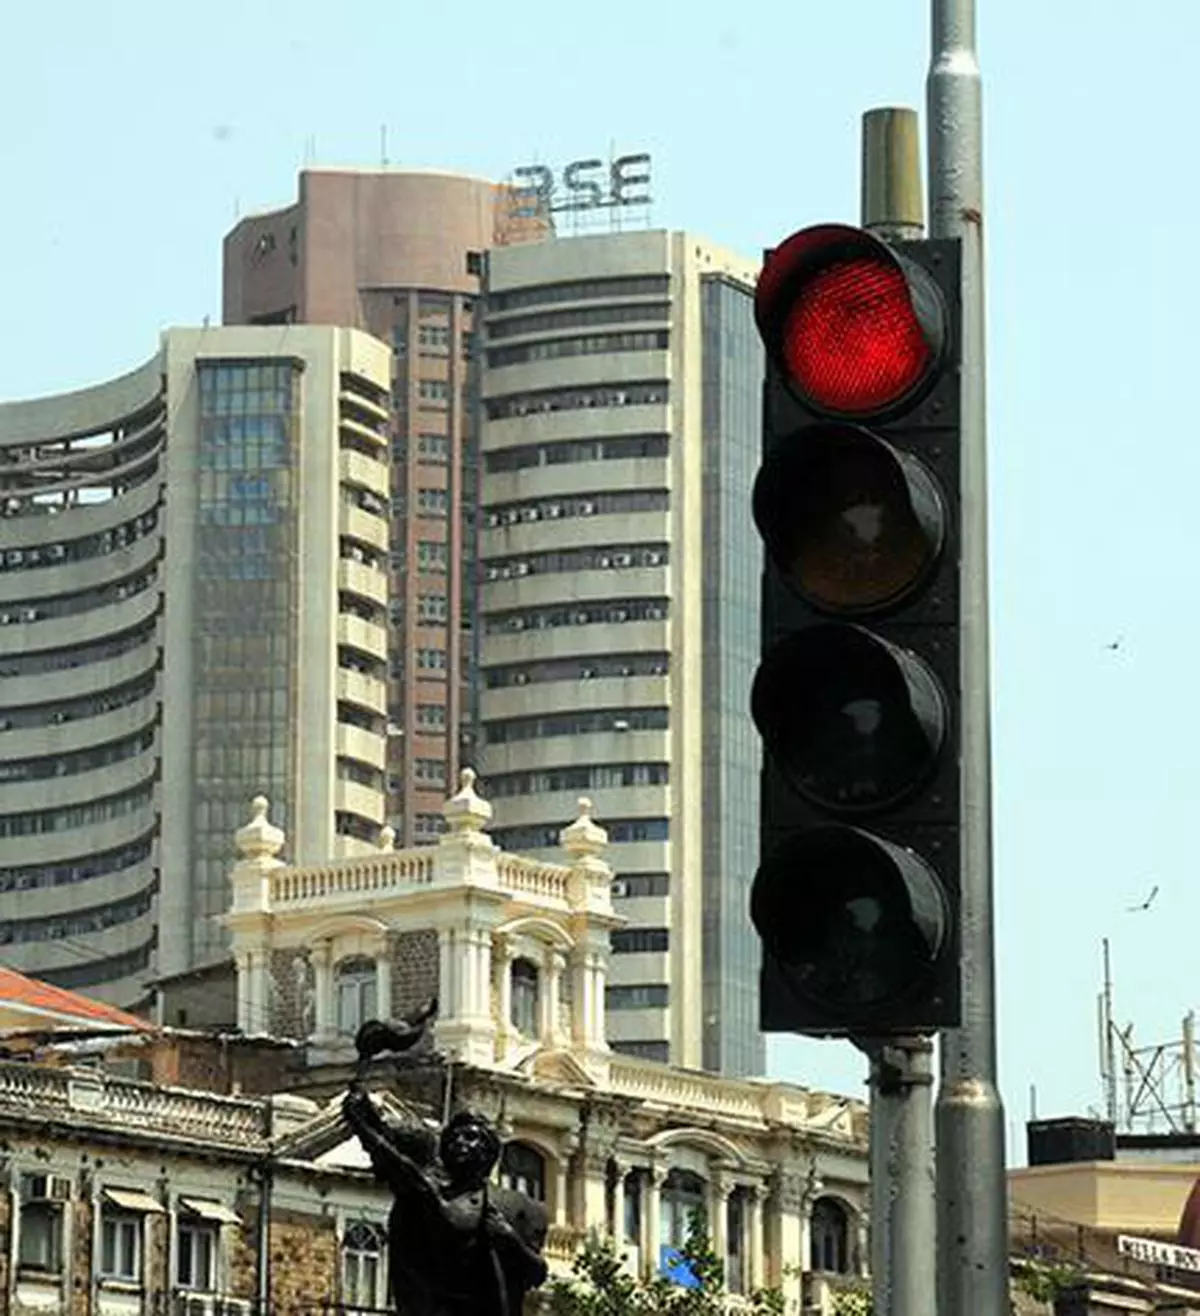 MUMBAI, MAHARASHTRA, 06/05/2015: A traffic signal in the foreground of the Bombay Stock Exchange on Dalal Street seems to reflect the mood of the stock markets in Mumbai on April 06, 2015 as the BSE Sensex was down by 722 points. Photo: Paul Noronha